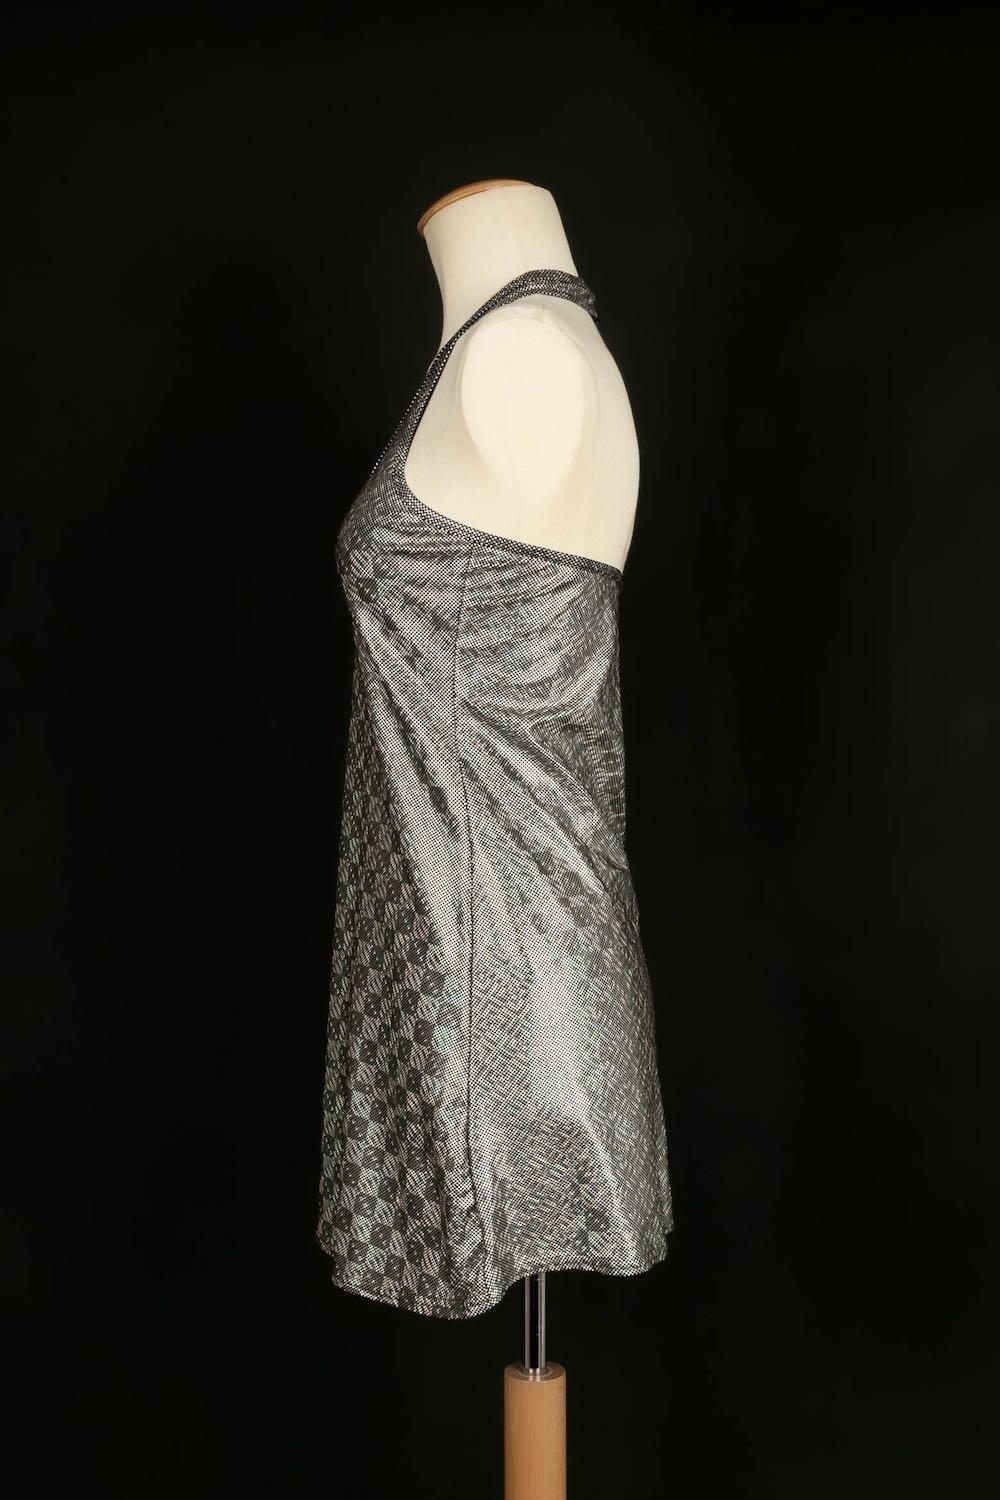 Azzaro - (Made in France) Silver mini dress. No size label, it fits a 36FR.

Additional information:
Condition: Very good condition
Dimensions: Chest: 40 cm - Length: 70 cm

Seller Reference: VR167